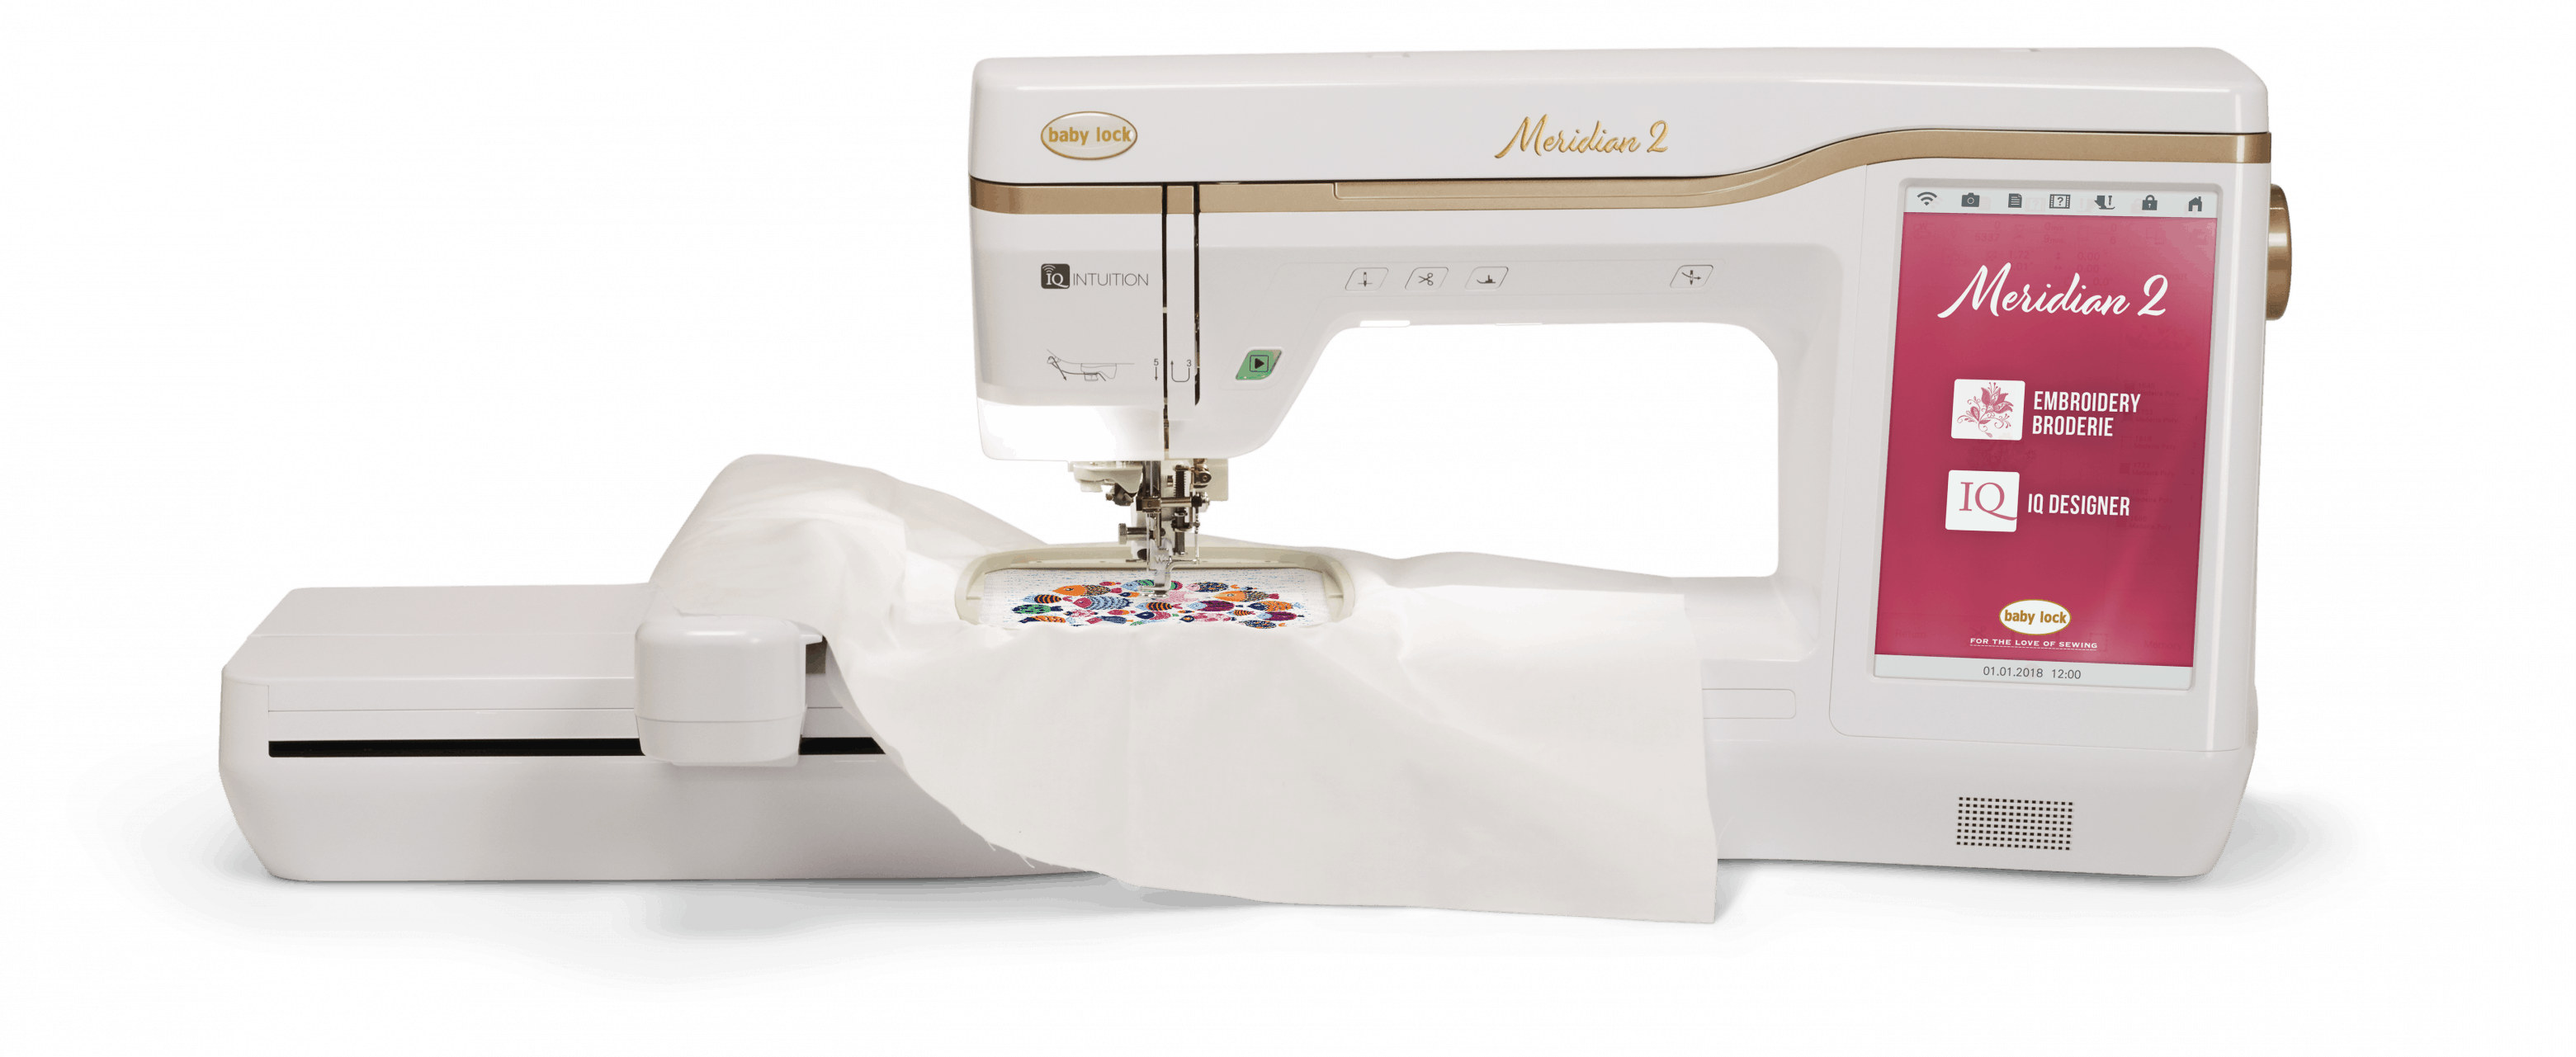 Quilt in a Day / Baby Lock Sewing Machines